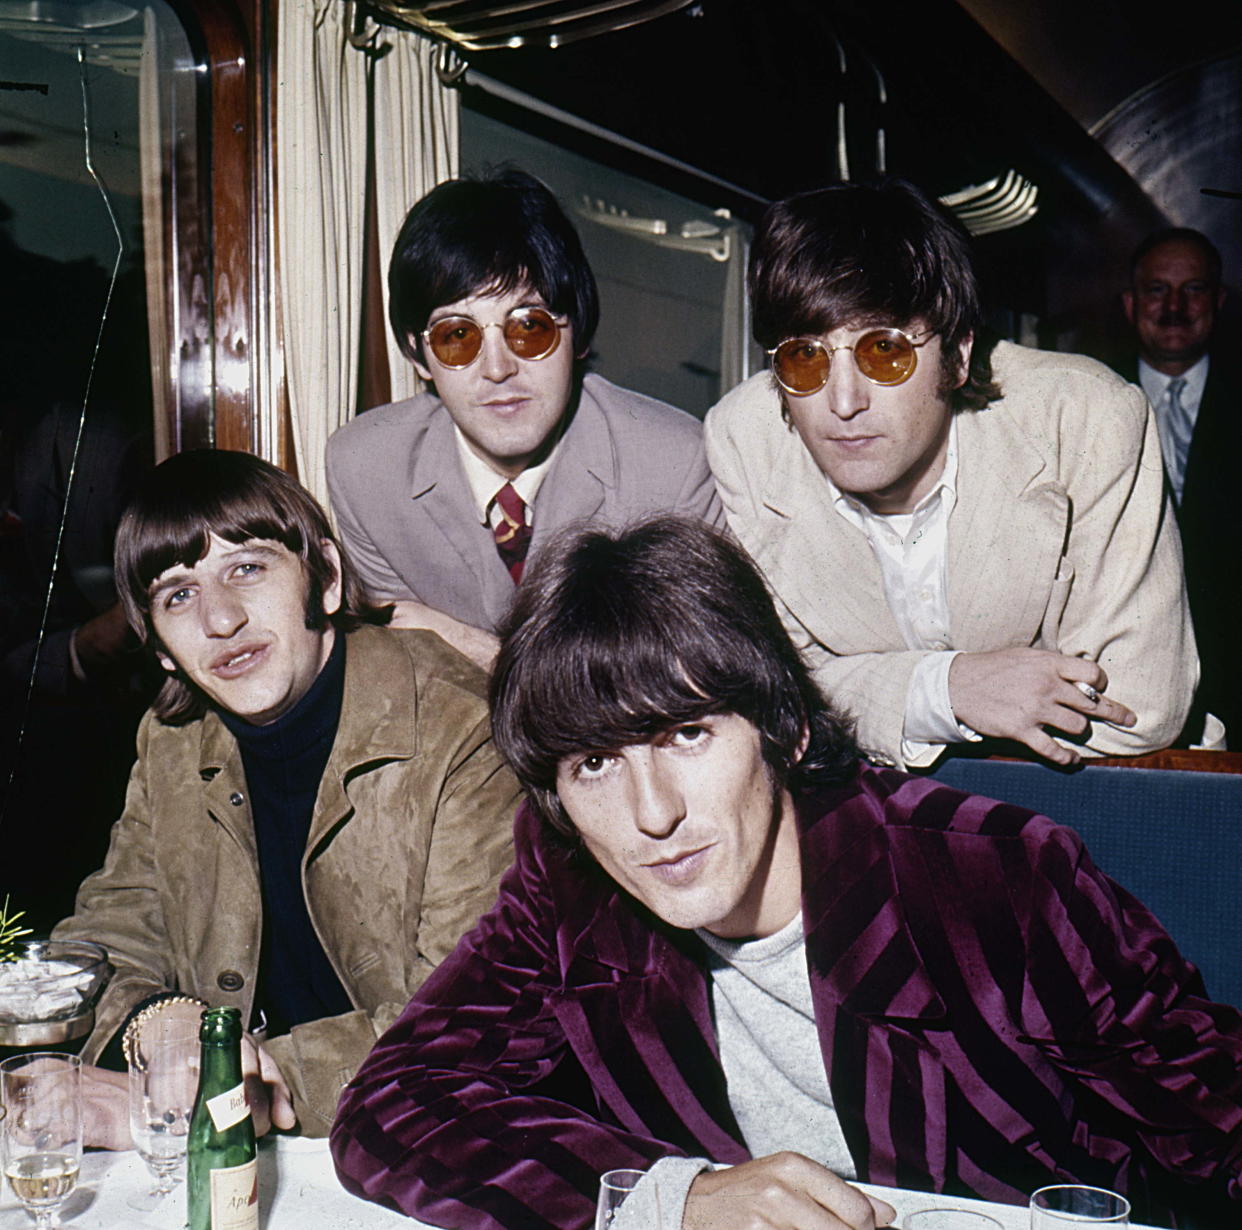 The Beatles in August 1966, the month 'Revolver' was released. (Photo: Roger Viollet Collection/Getty Images)